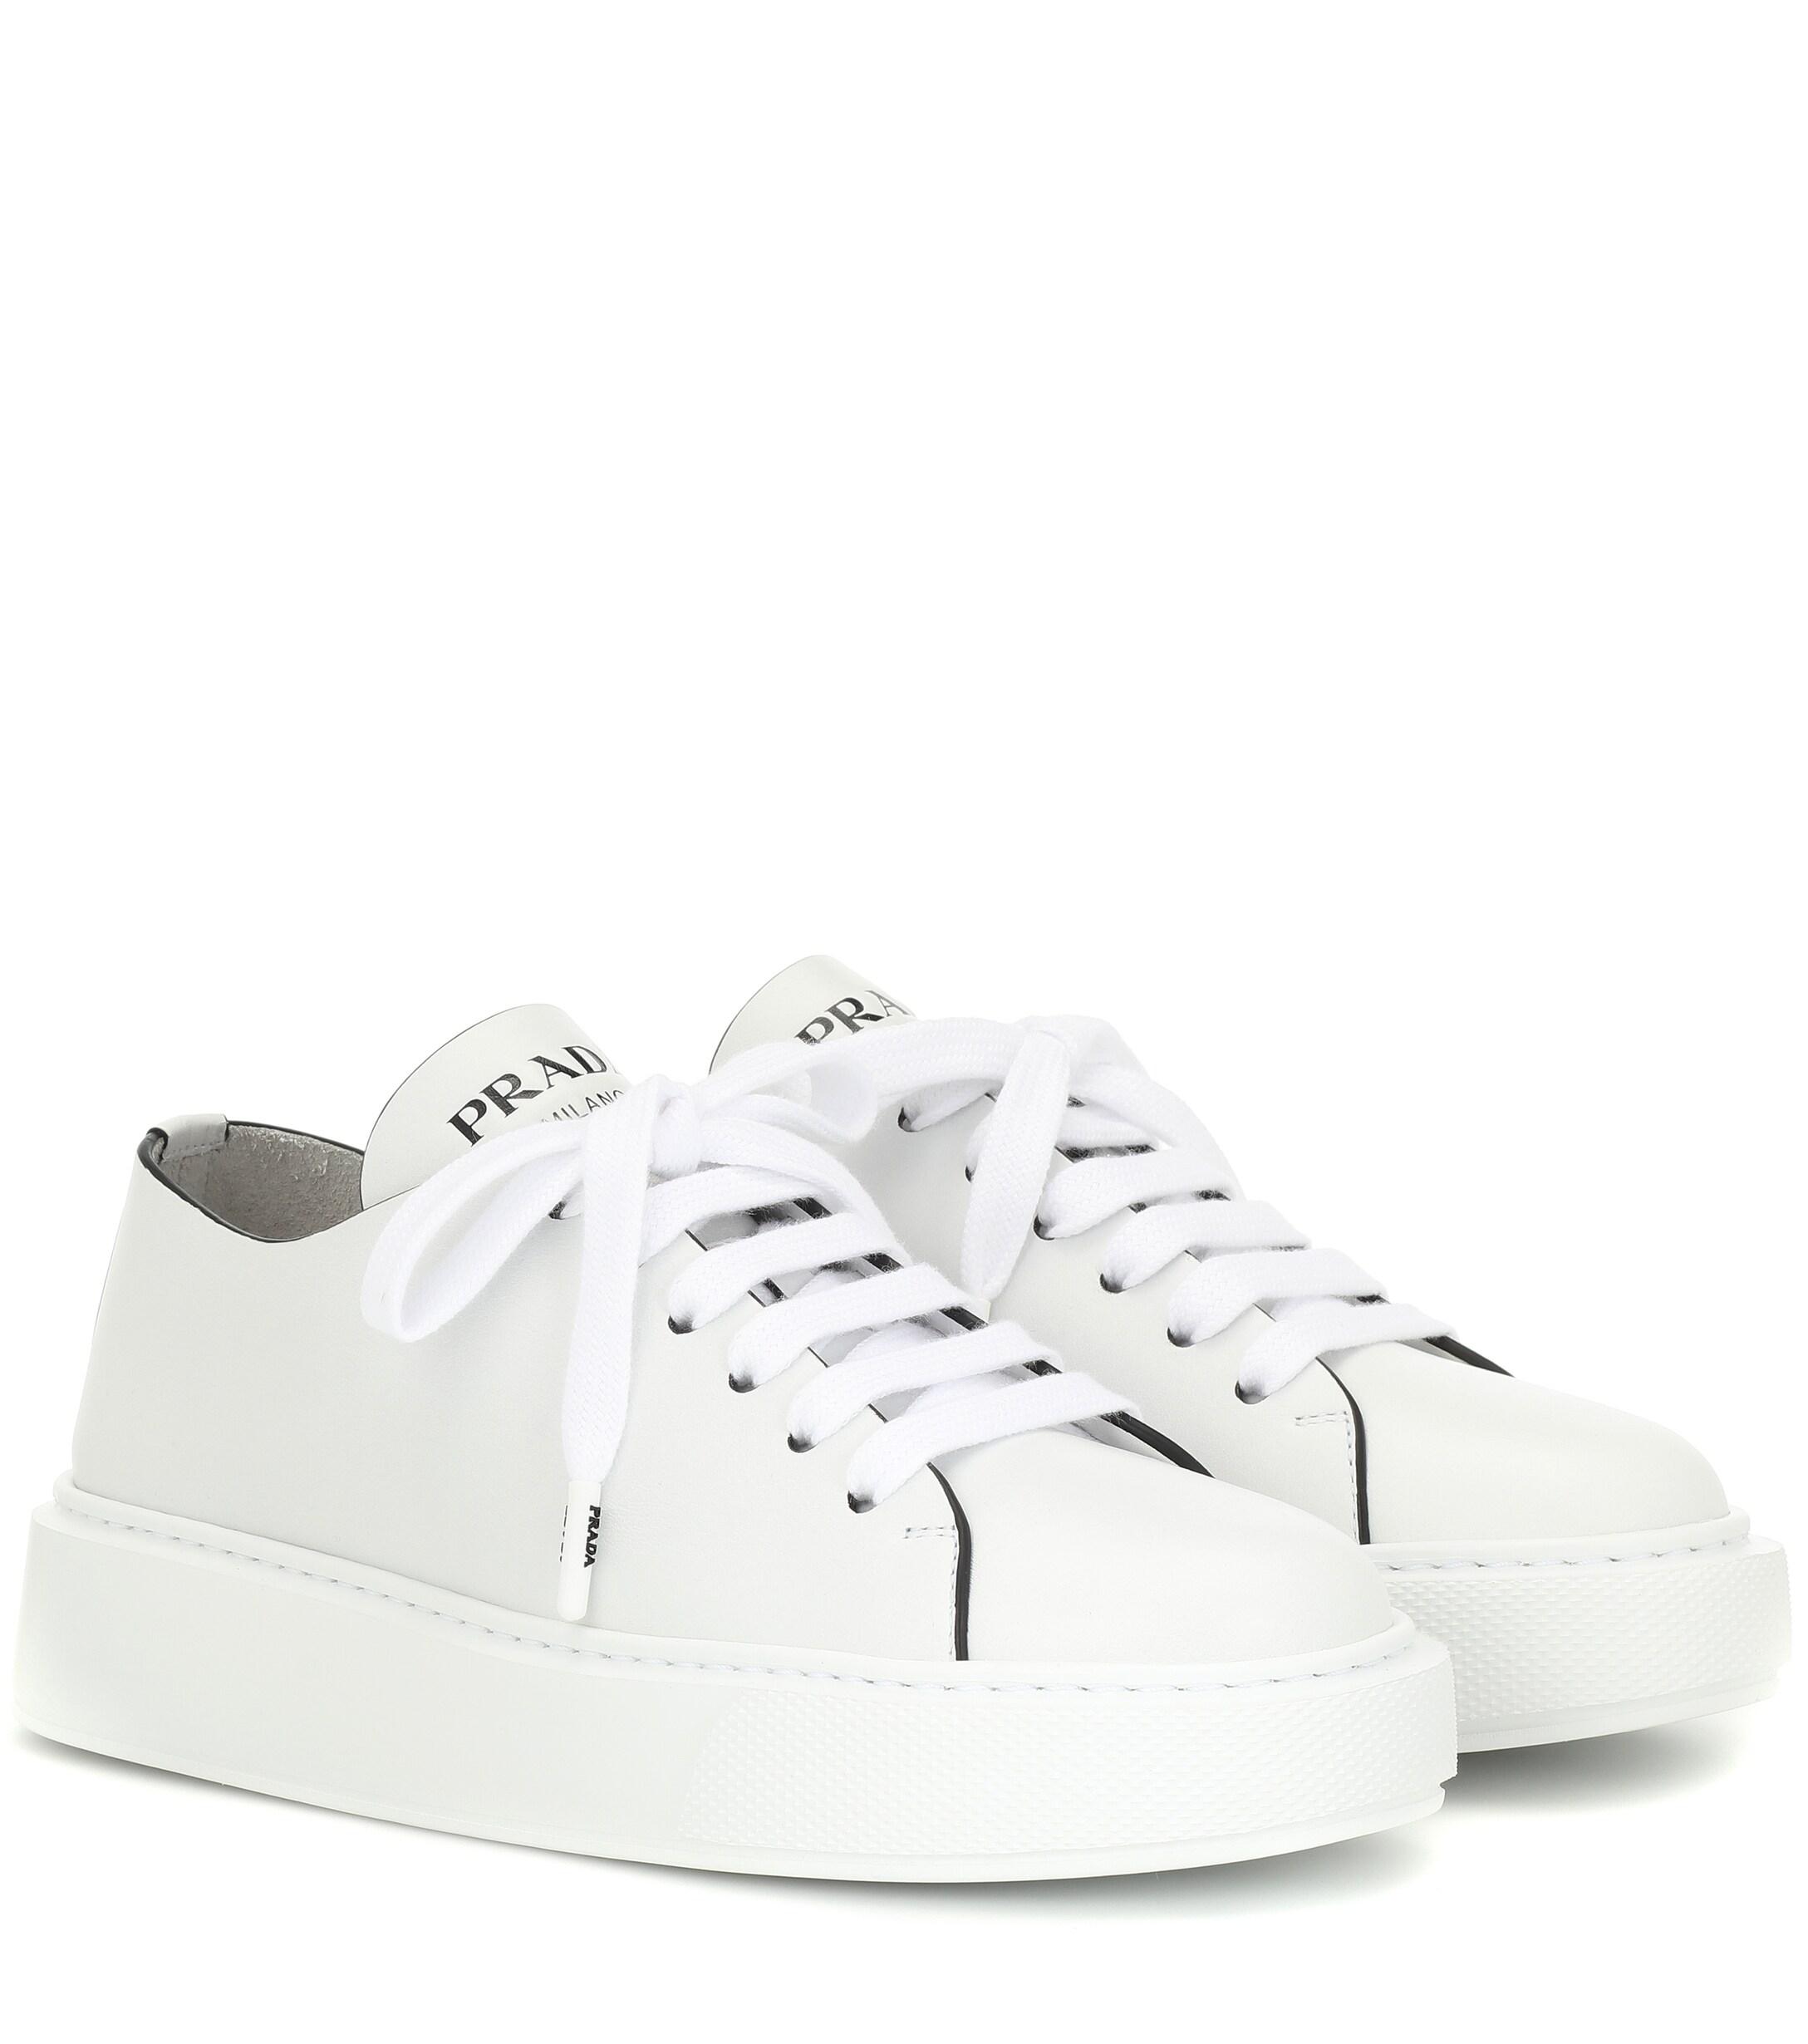 Prada Leather Sneakers in White